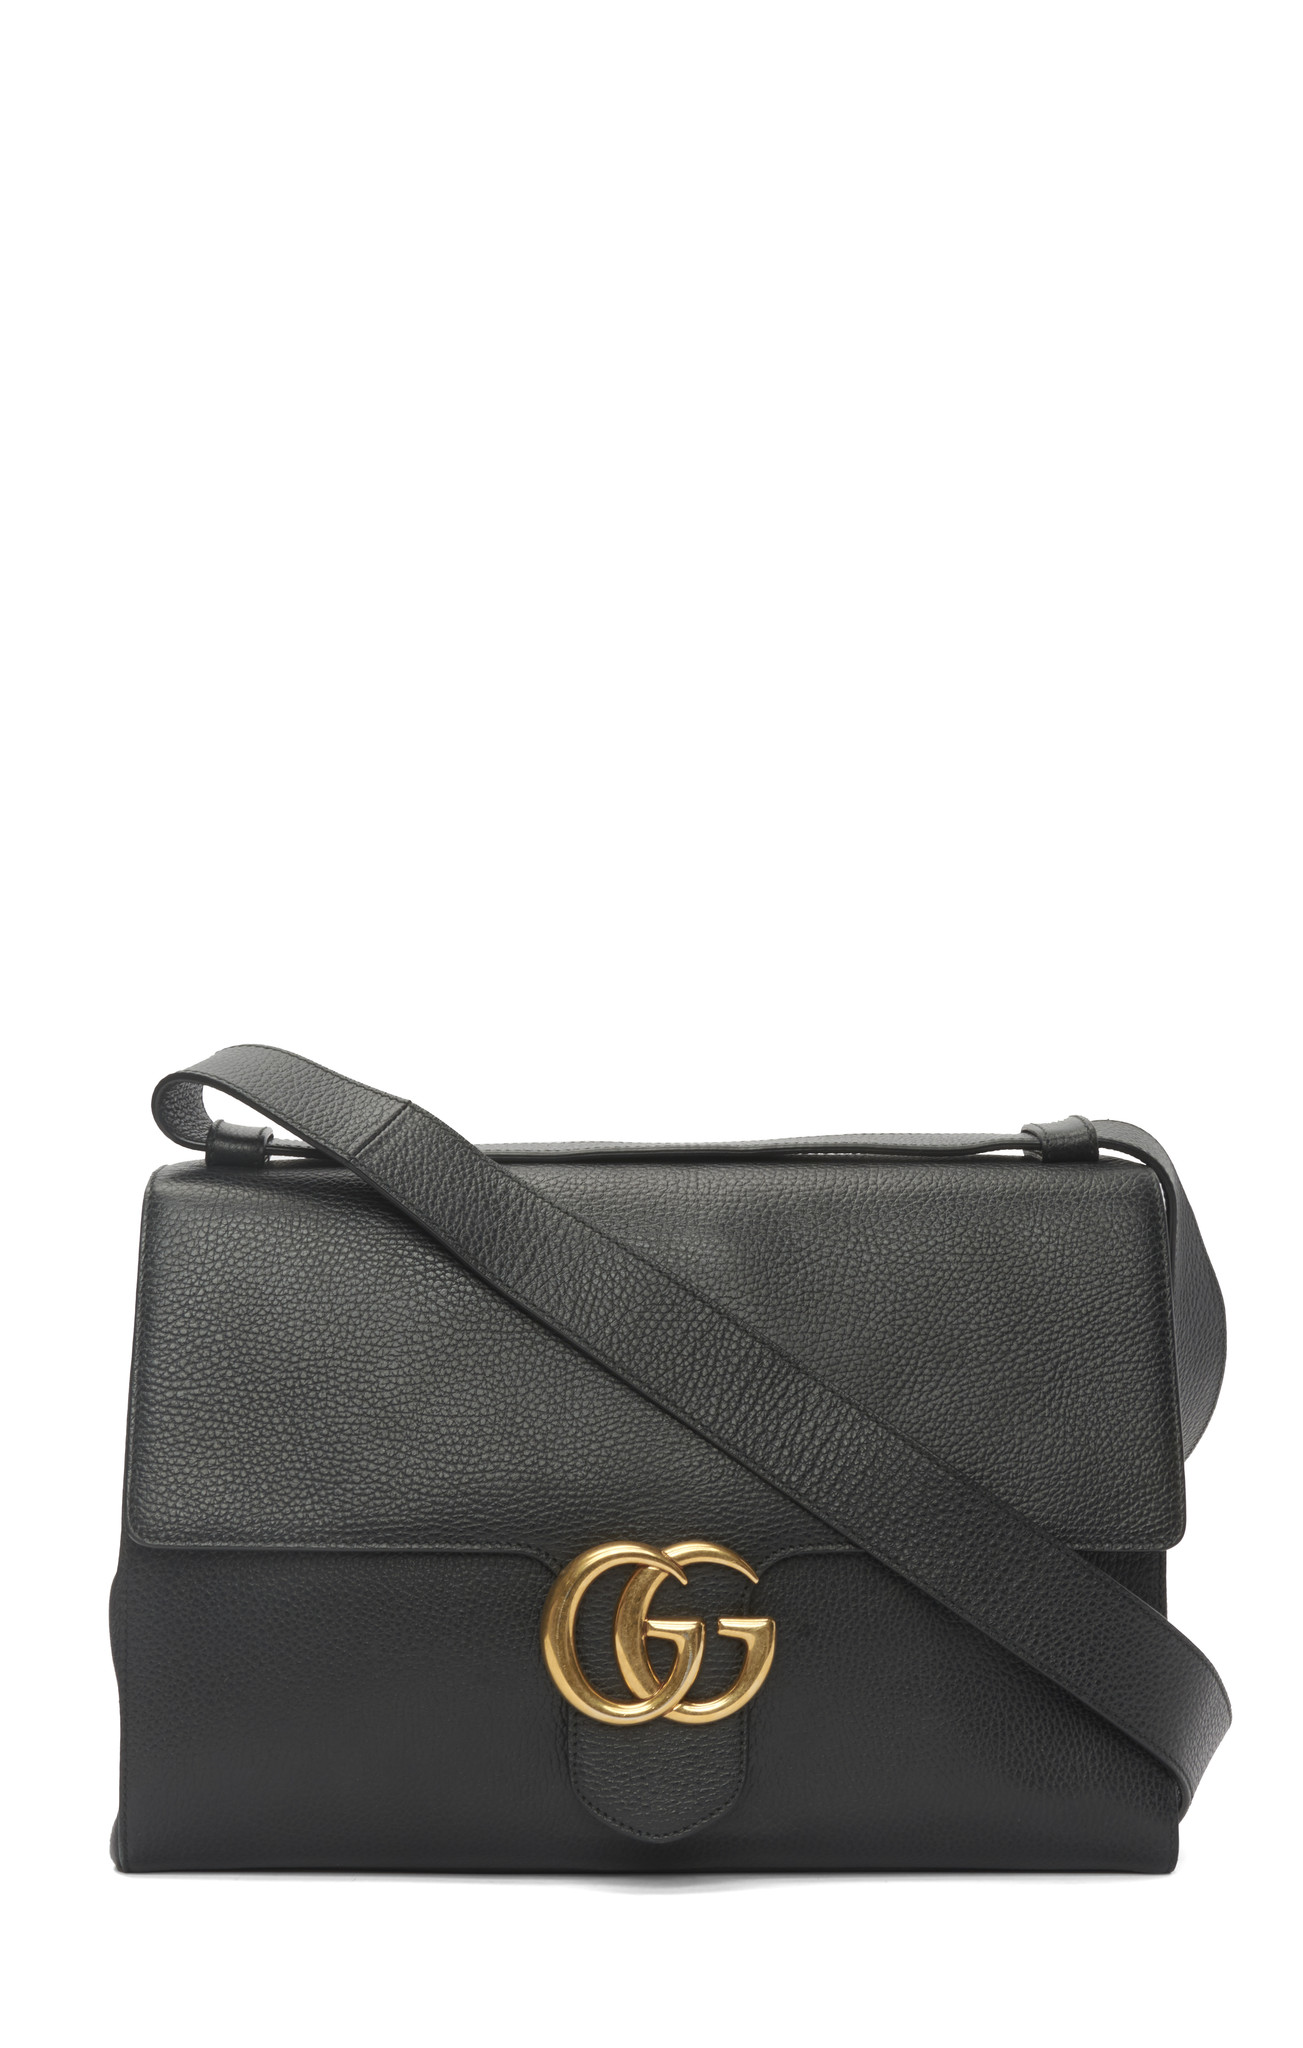 Gucci Black Pebbled Leather GG Marmont XL Messenger Bag - RETYCHE